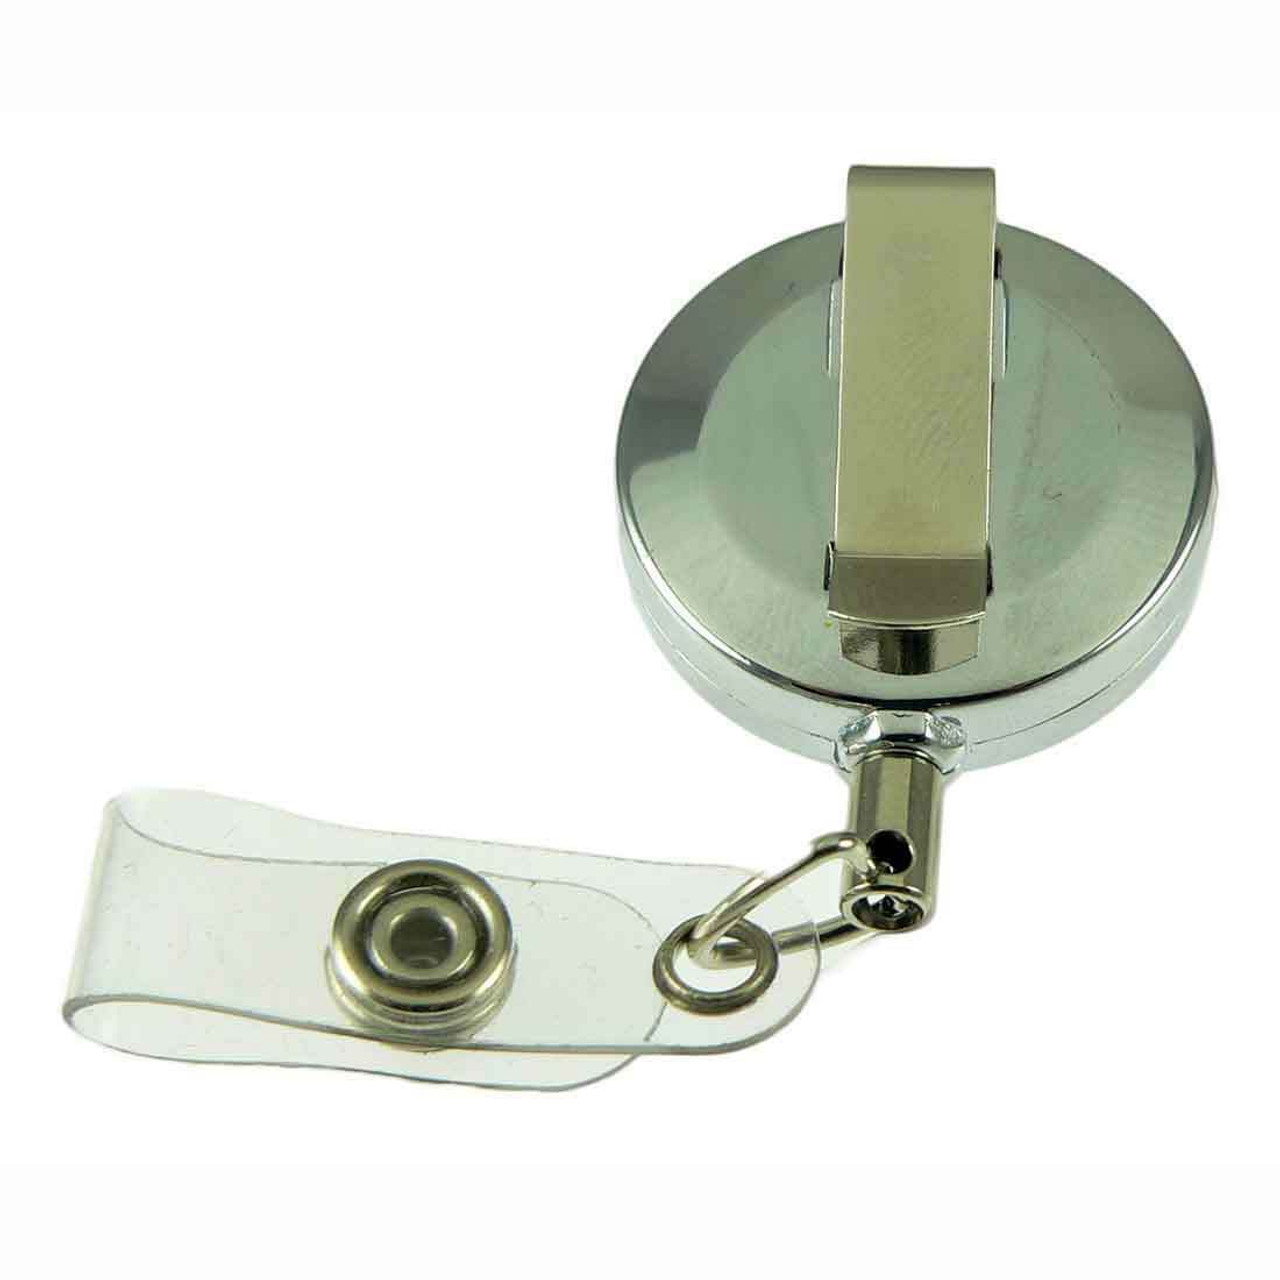 Louisiana Home ID badge holder with retractable reel., 790672